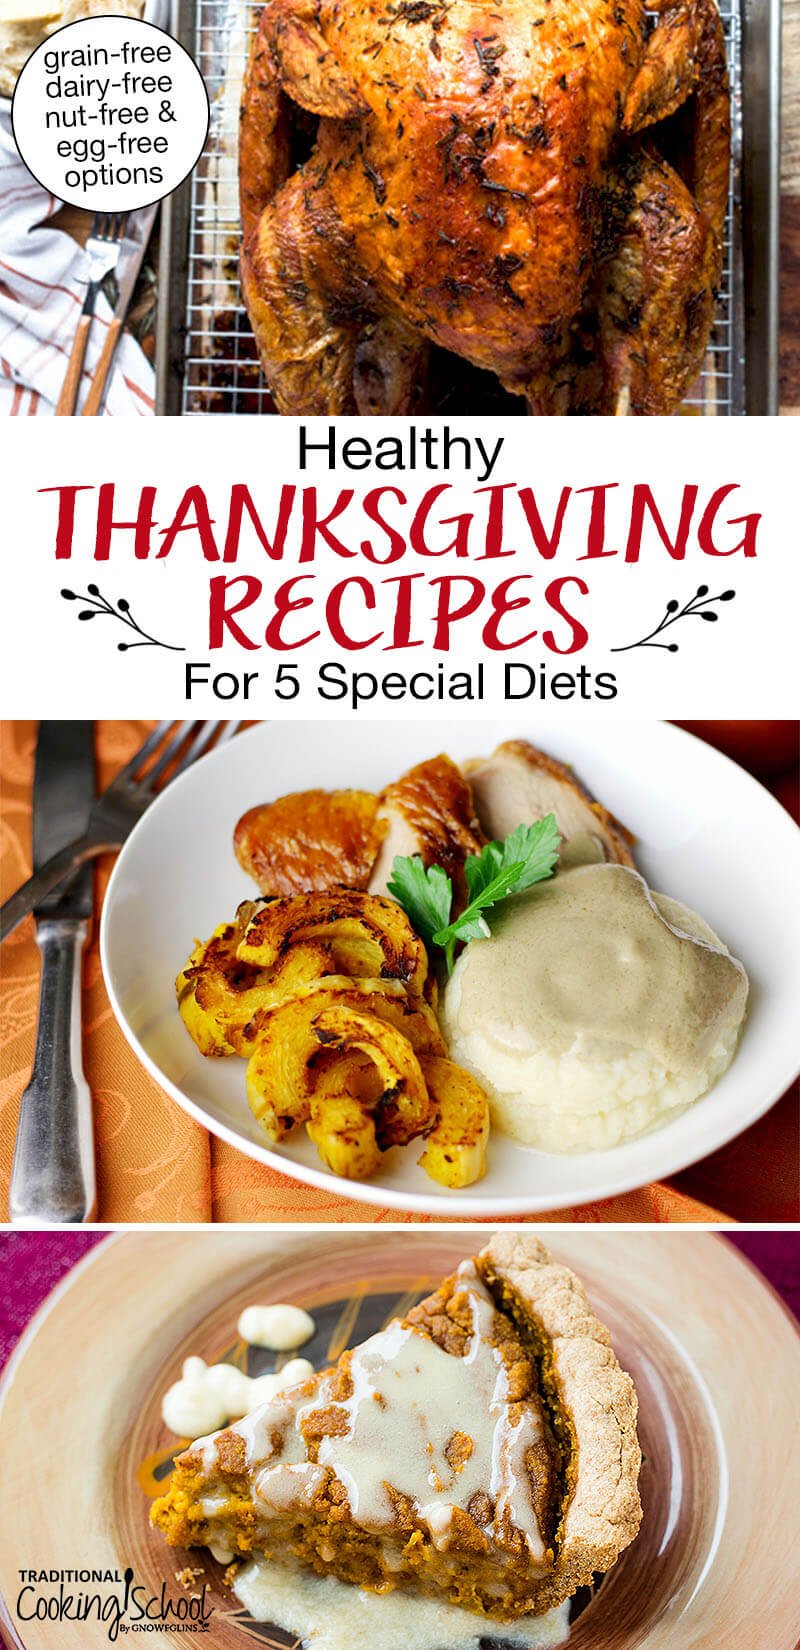 Photo collage of roast turkey, homemade gravy over mashed potatoes on a plate with sweet potatoes and sliced turkey, and a slice of pumpkin pie. Text overlay says: "Healthy Thanksgiving Recipes For 5 Special Diets (grain-free dairy-free nut-free & egg-free options)"